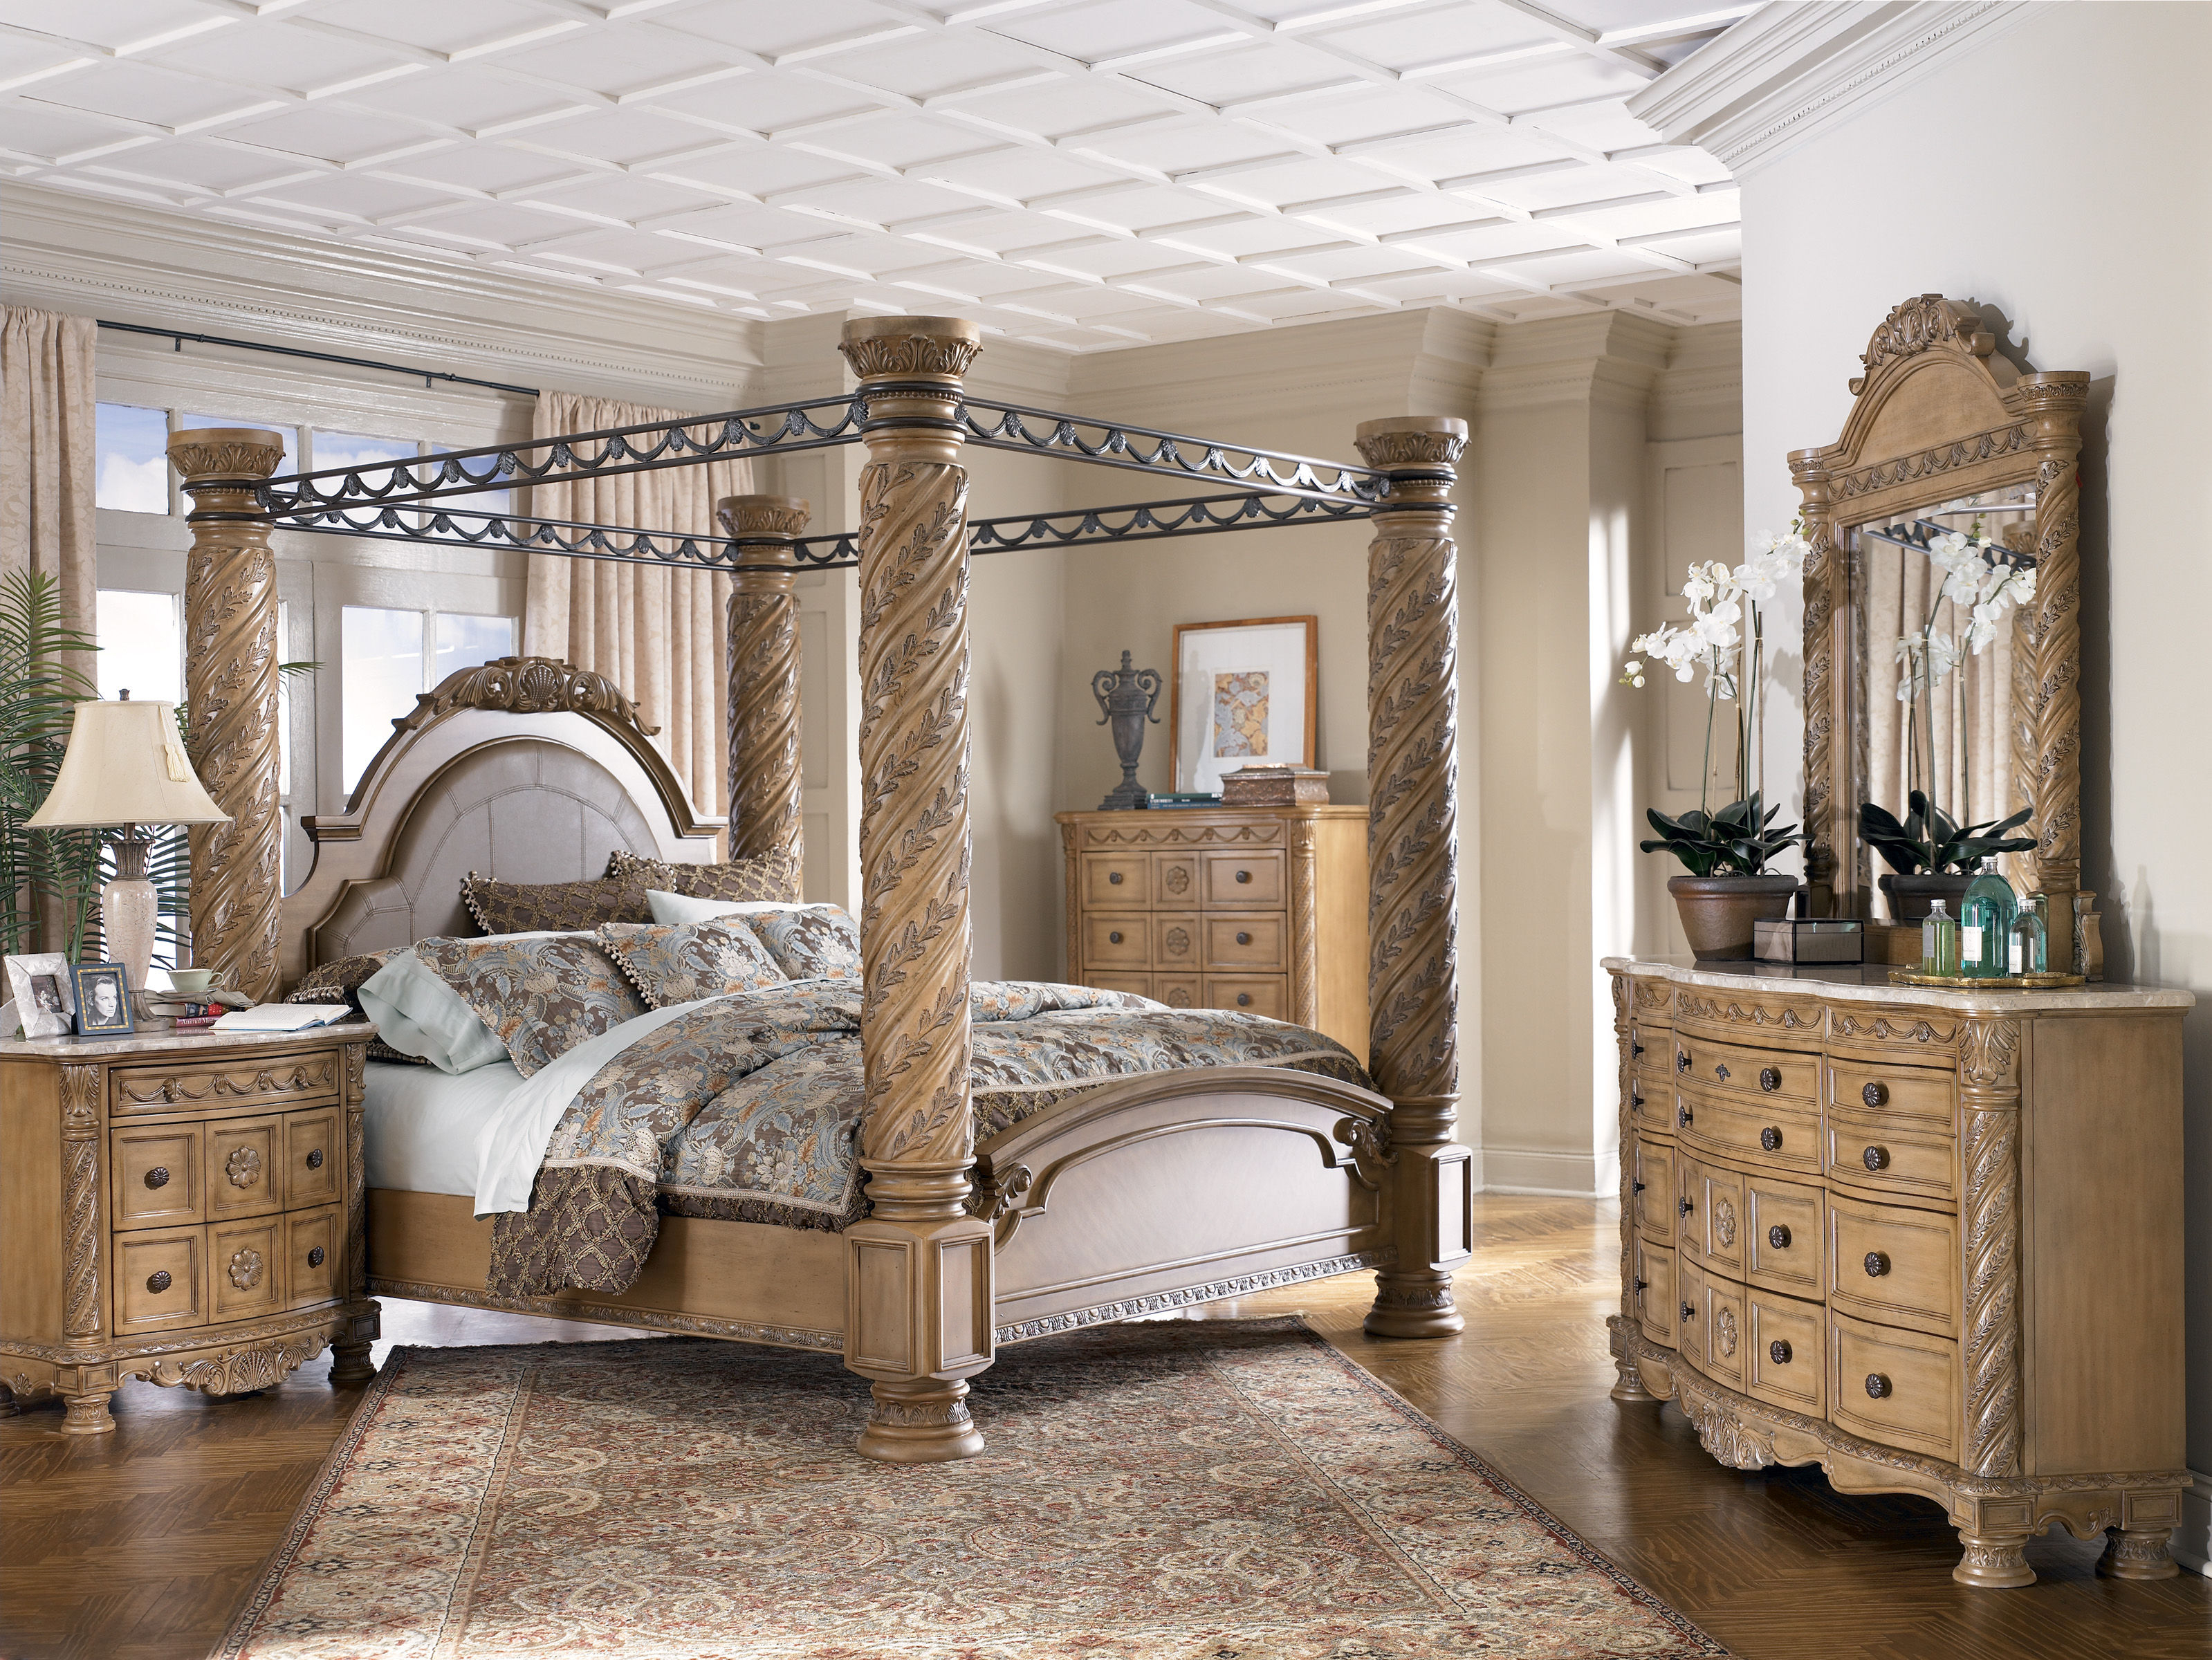 Old World 5 Pc Bedroom Set W King Poster Bed The Classy Home in dimensions 3198 X 2400